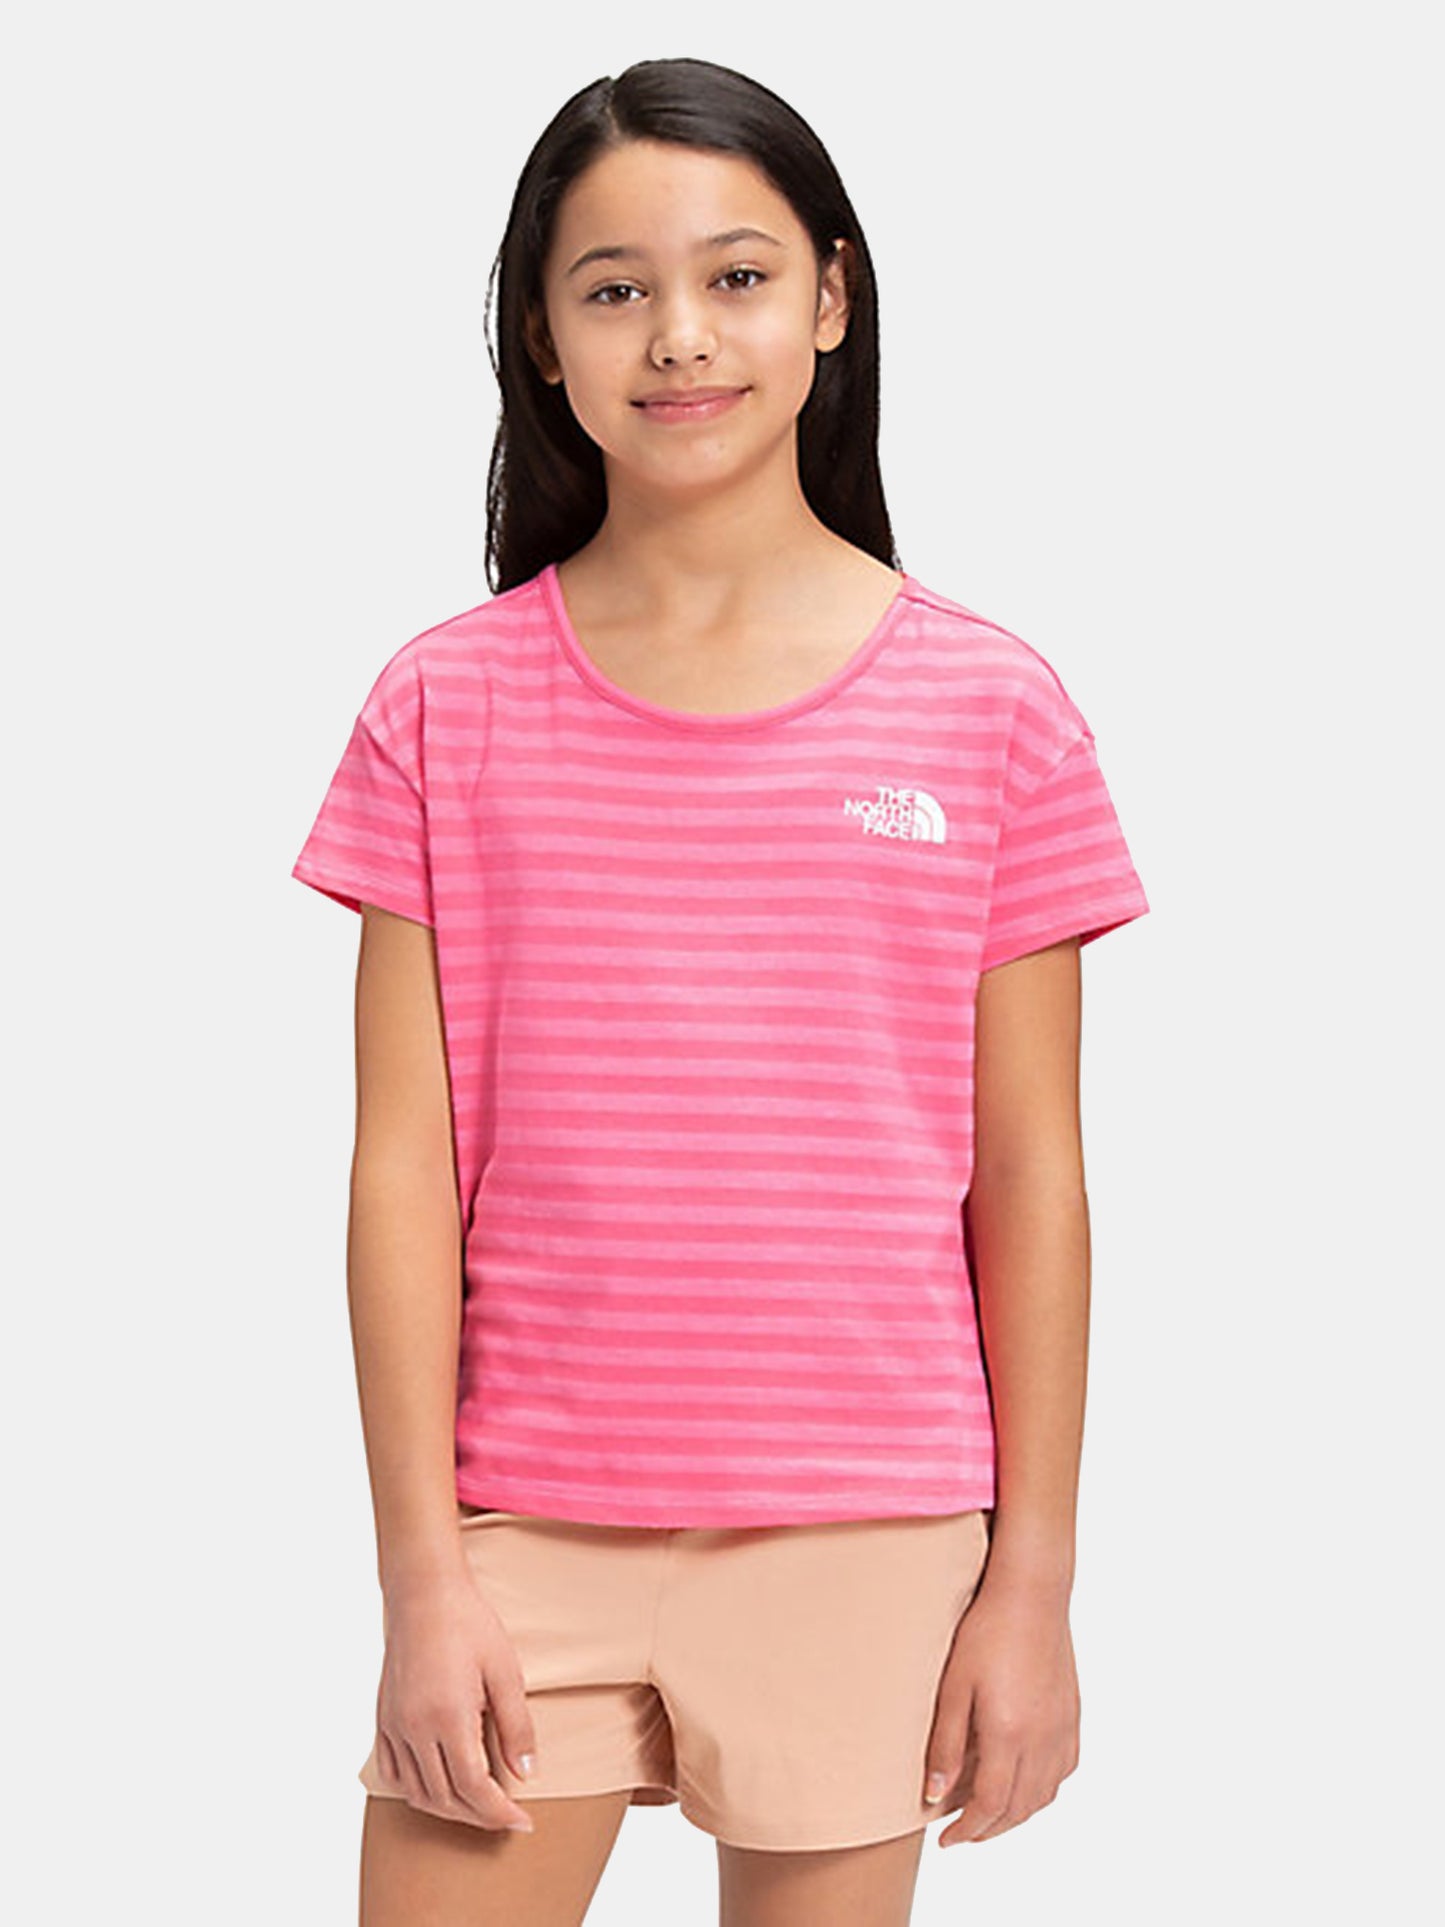 The North Face Girls' Short Sleeve Tri-Blend Tee